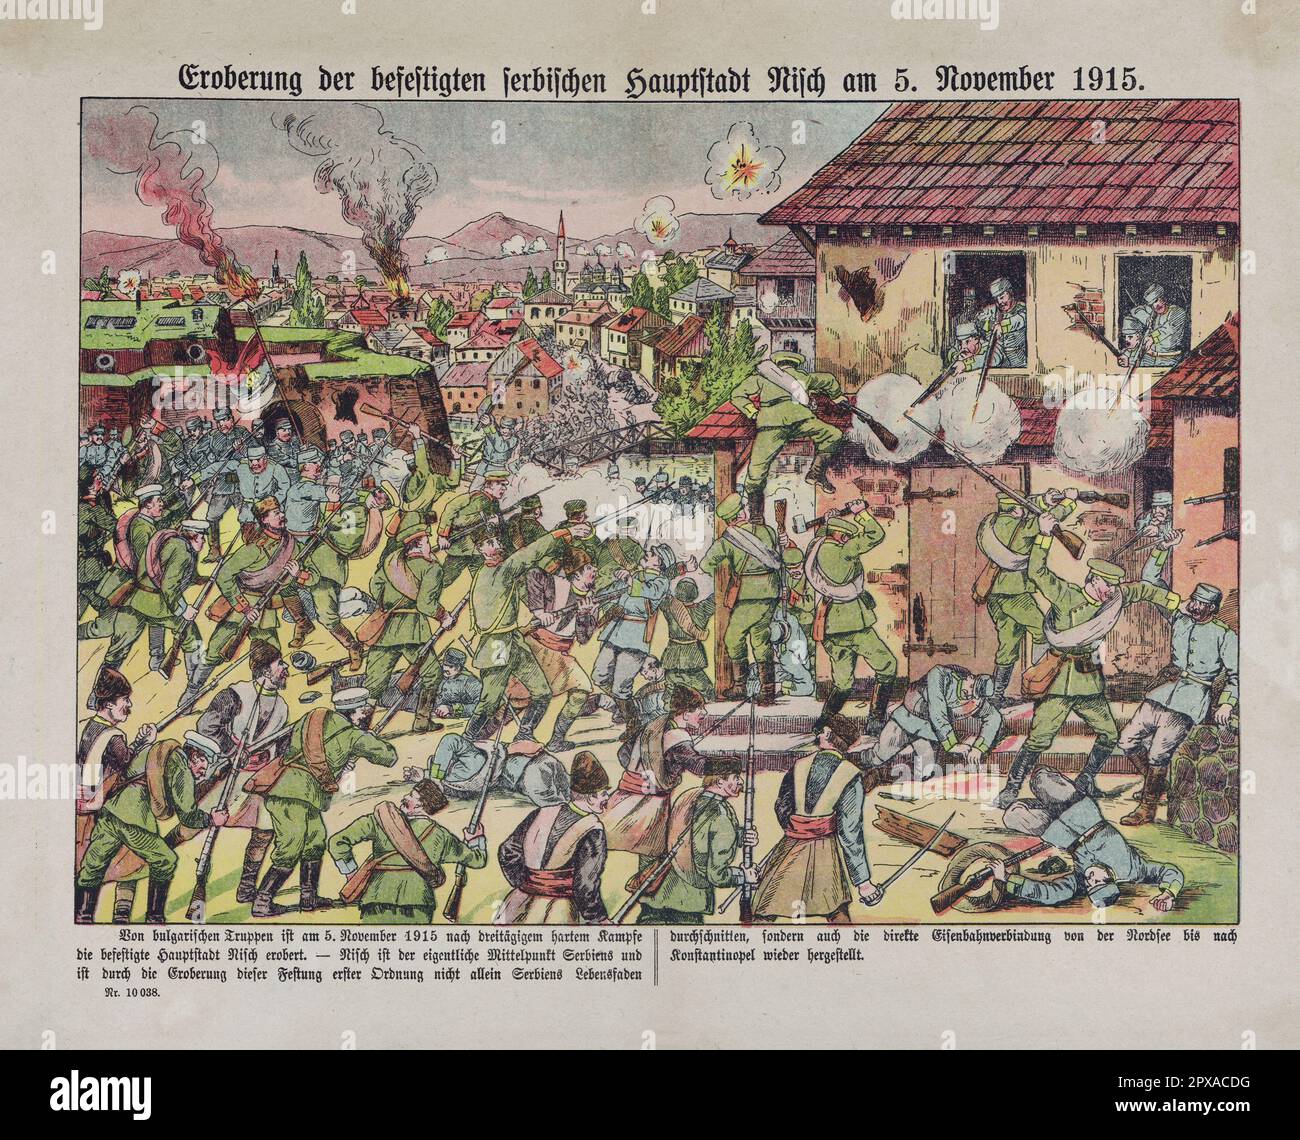 Colour engraving of capture of the fortified Serbian capital Nisch on November 5, 1915 (Morava Offensive). The Morava Offensive Operation was undertaken by the Bulgarian First Army between 14 October 1915 and 9 November 1915 as part of the strategic offensive operation of Army Group Mackensen against Serbia in 1915. Under the command of Lieutenant General Kliment Boyadzhiev the Bulgarians seized the fortified areas of Pirot, Niš and the valley of the river Morava. As a result, the Serbian forces were compelled to retreat towards Kosovo and Metohija. Stock Photo